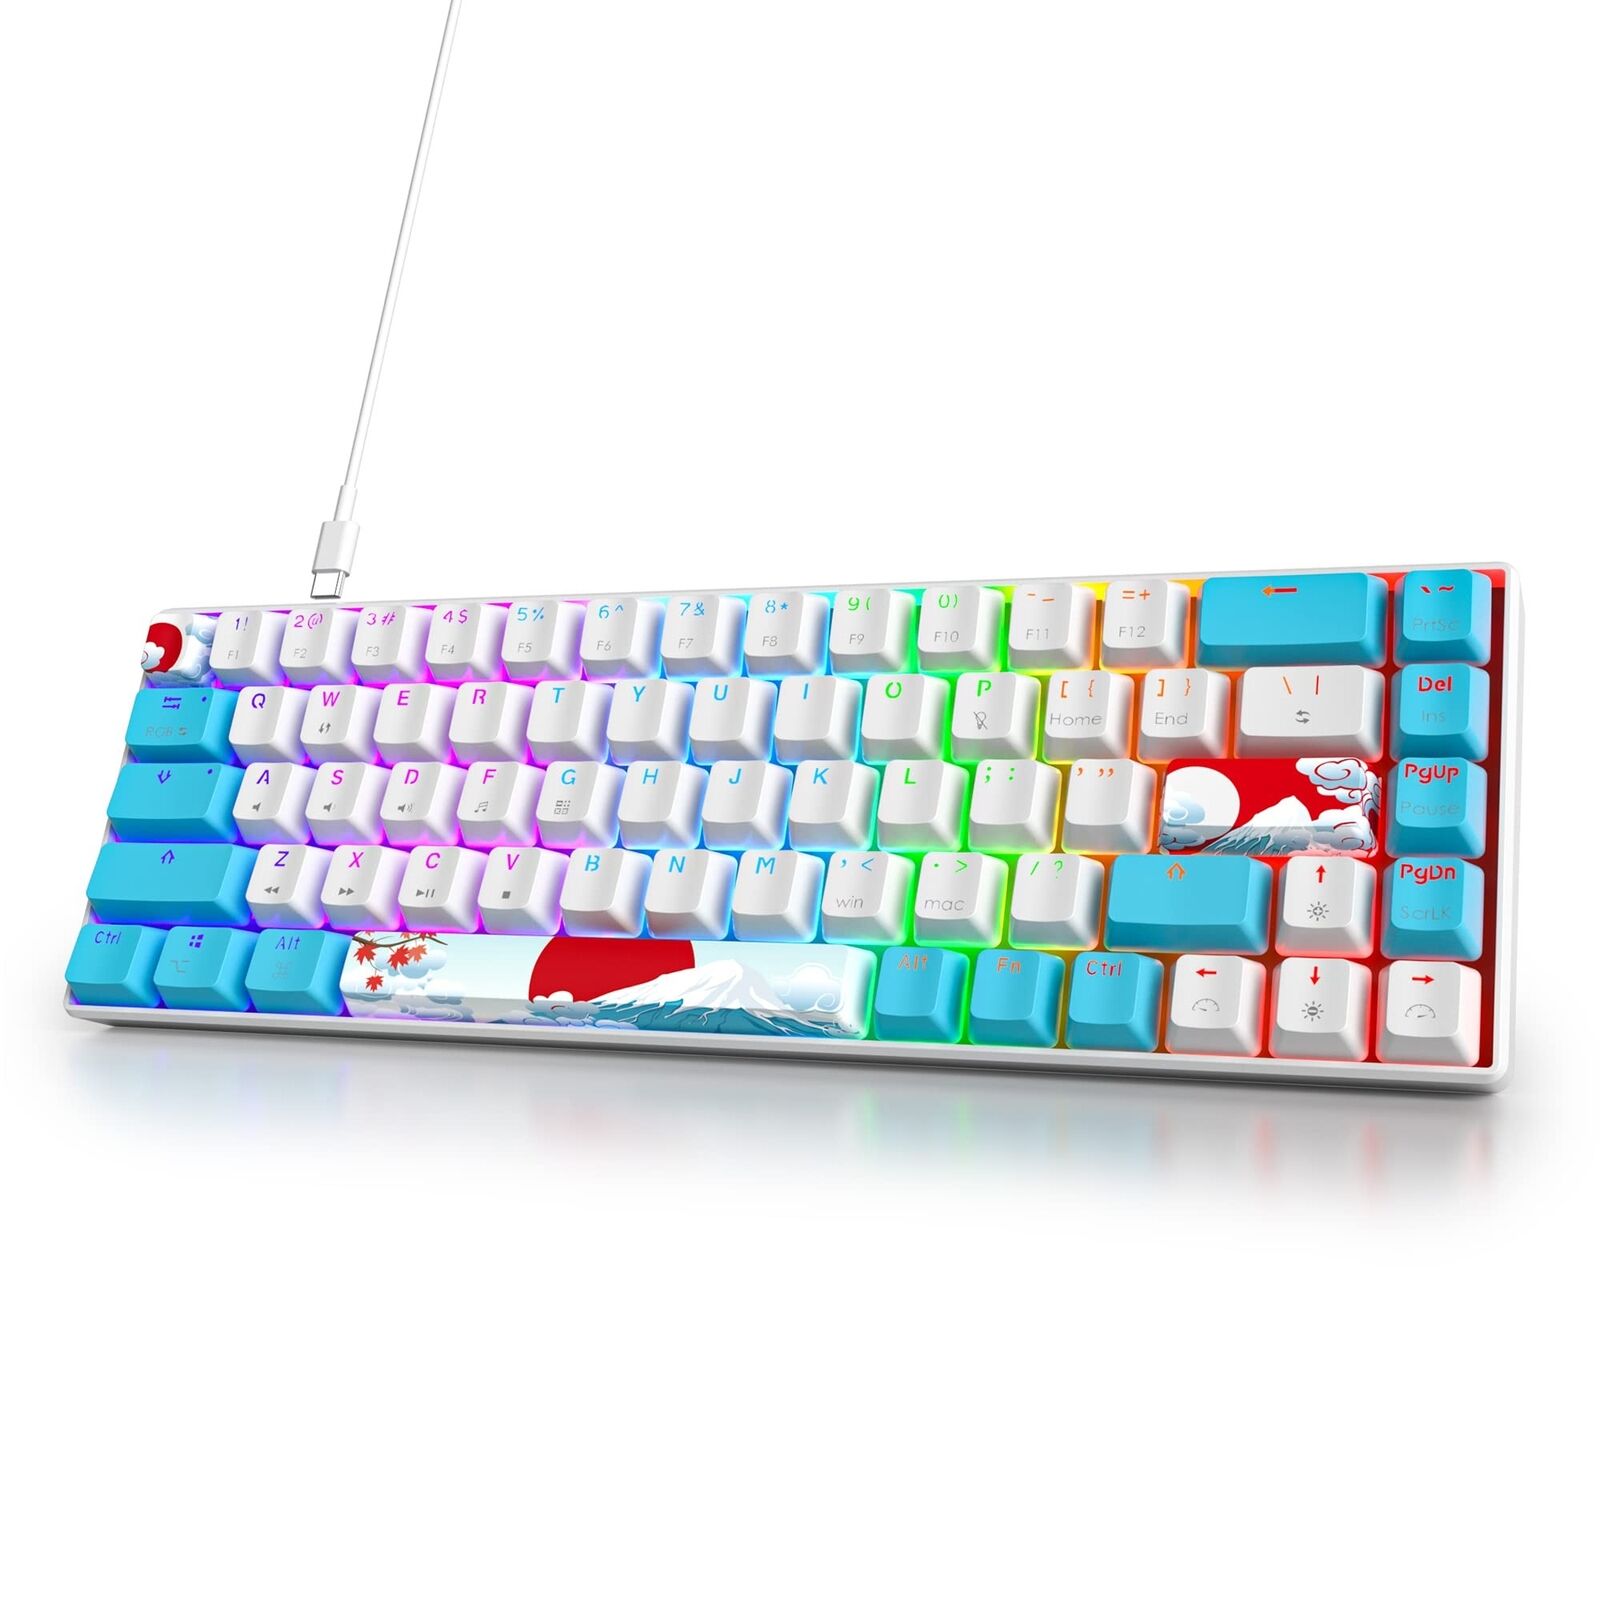 Owpkeenthy Wired 65% Mechanical Gaming Keyboard with Blue Switch 60% Ultra Co...